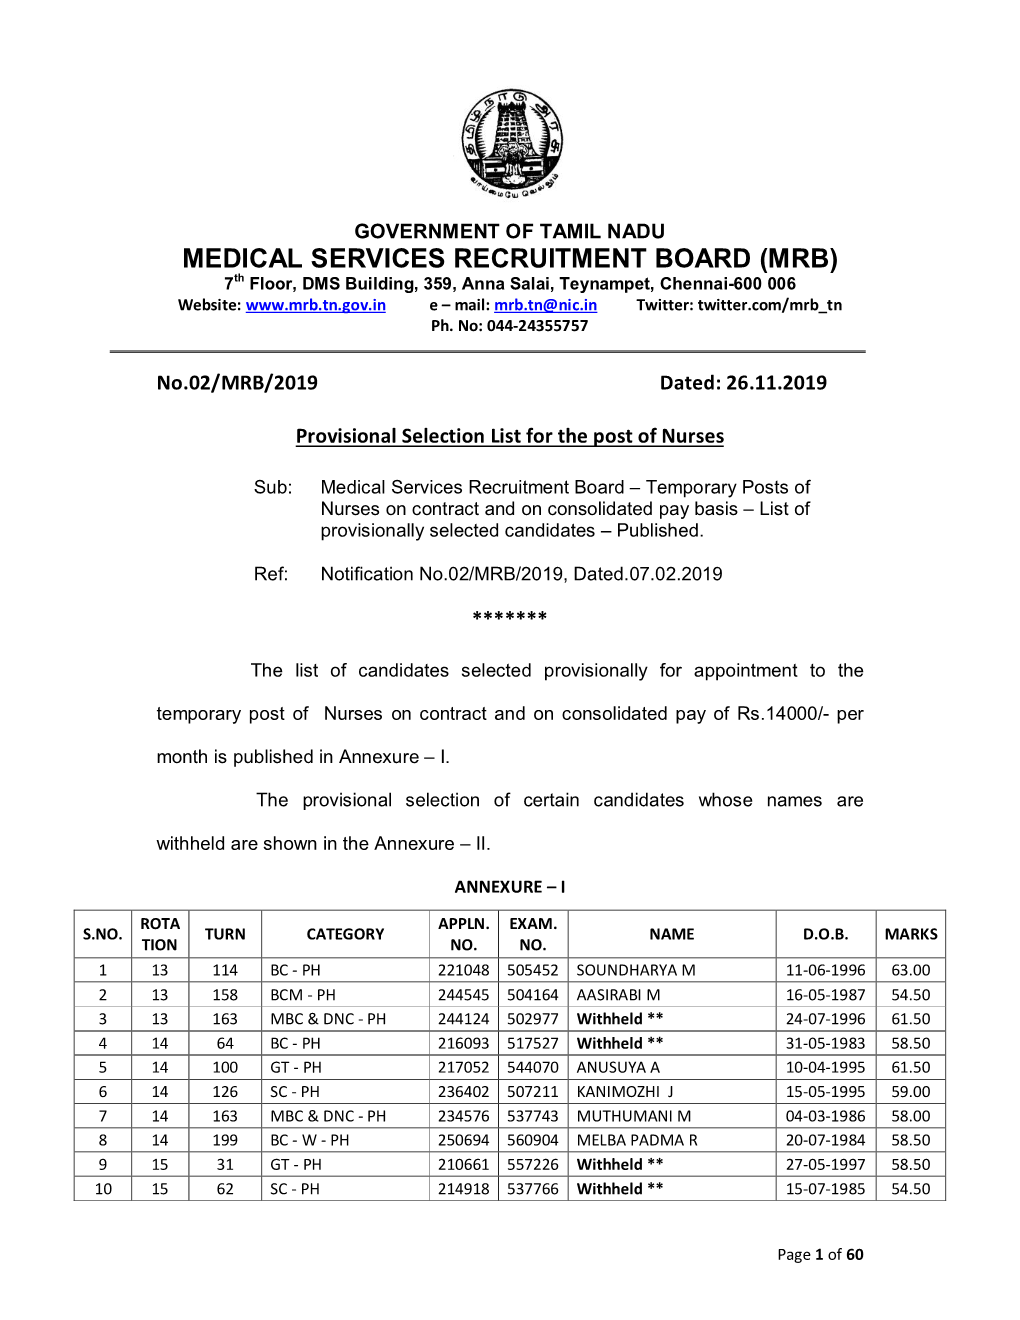 Provisional Selection List for the Post of Nurses, 2019